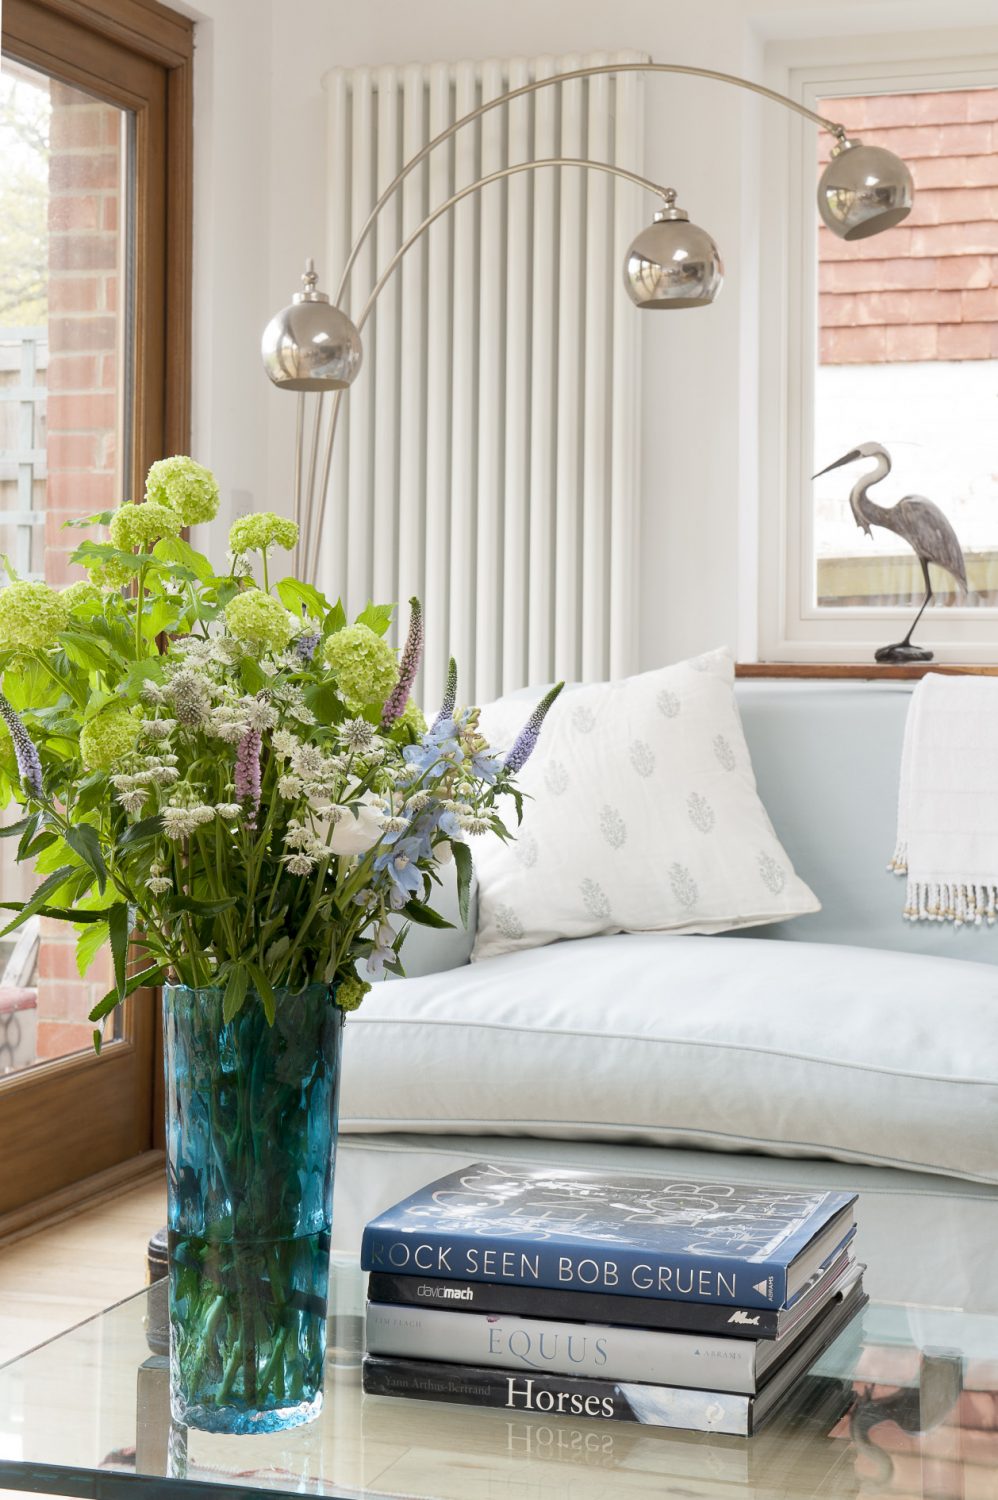 Retro lamps contrast with a vase of pretty cottage garden flowers and an elegant heron sculpture